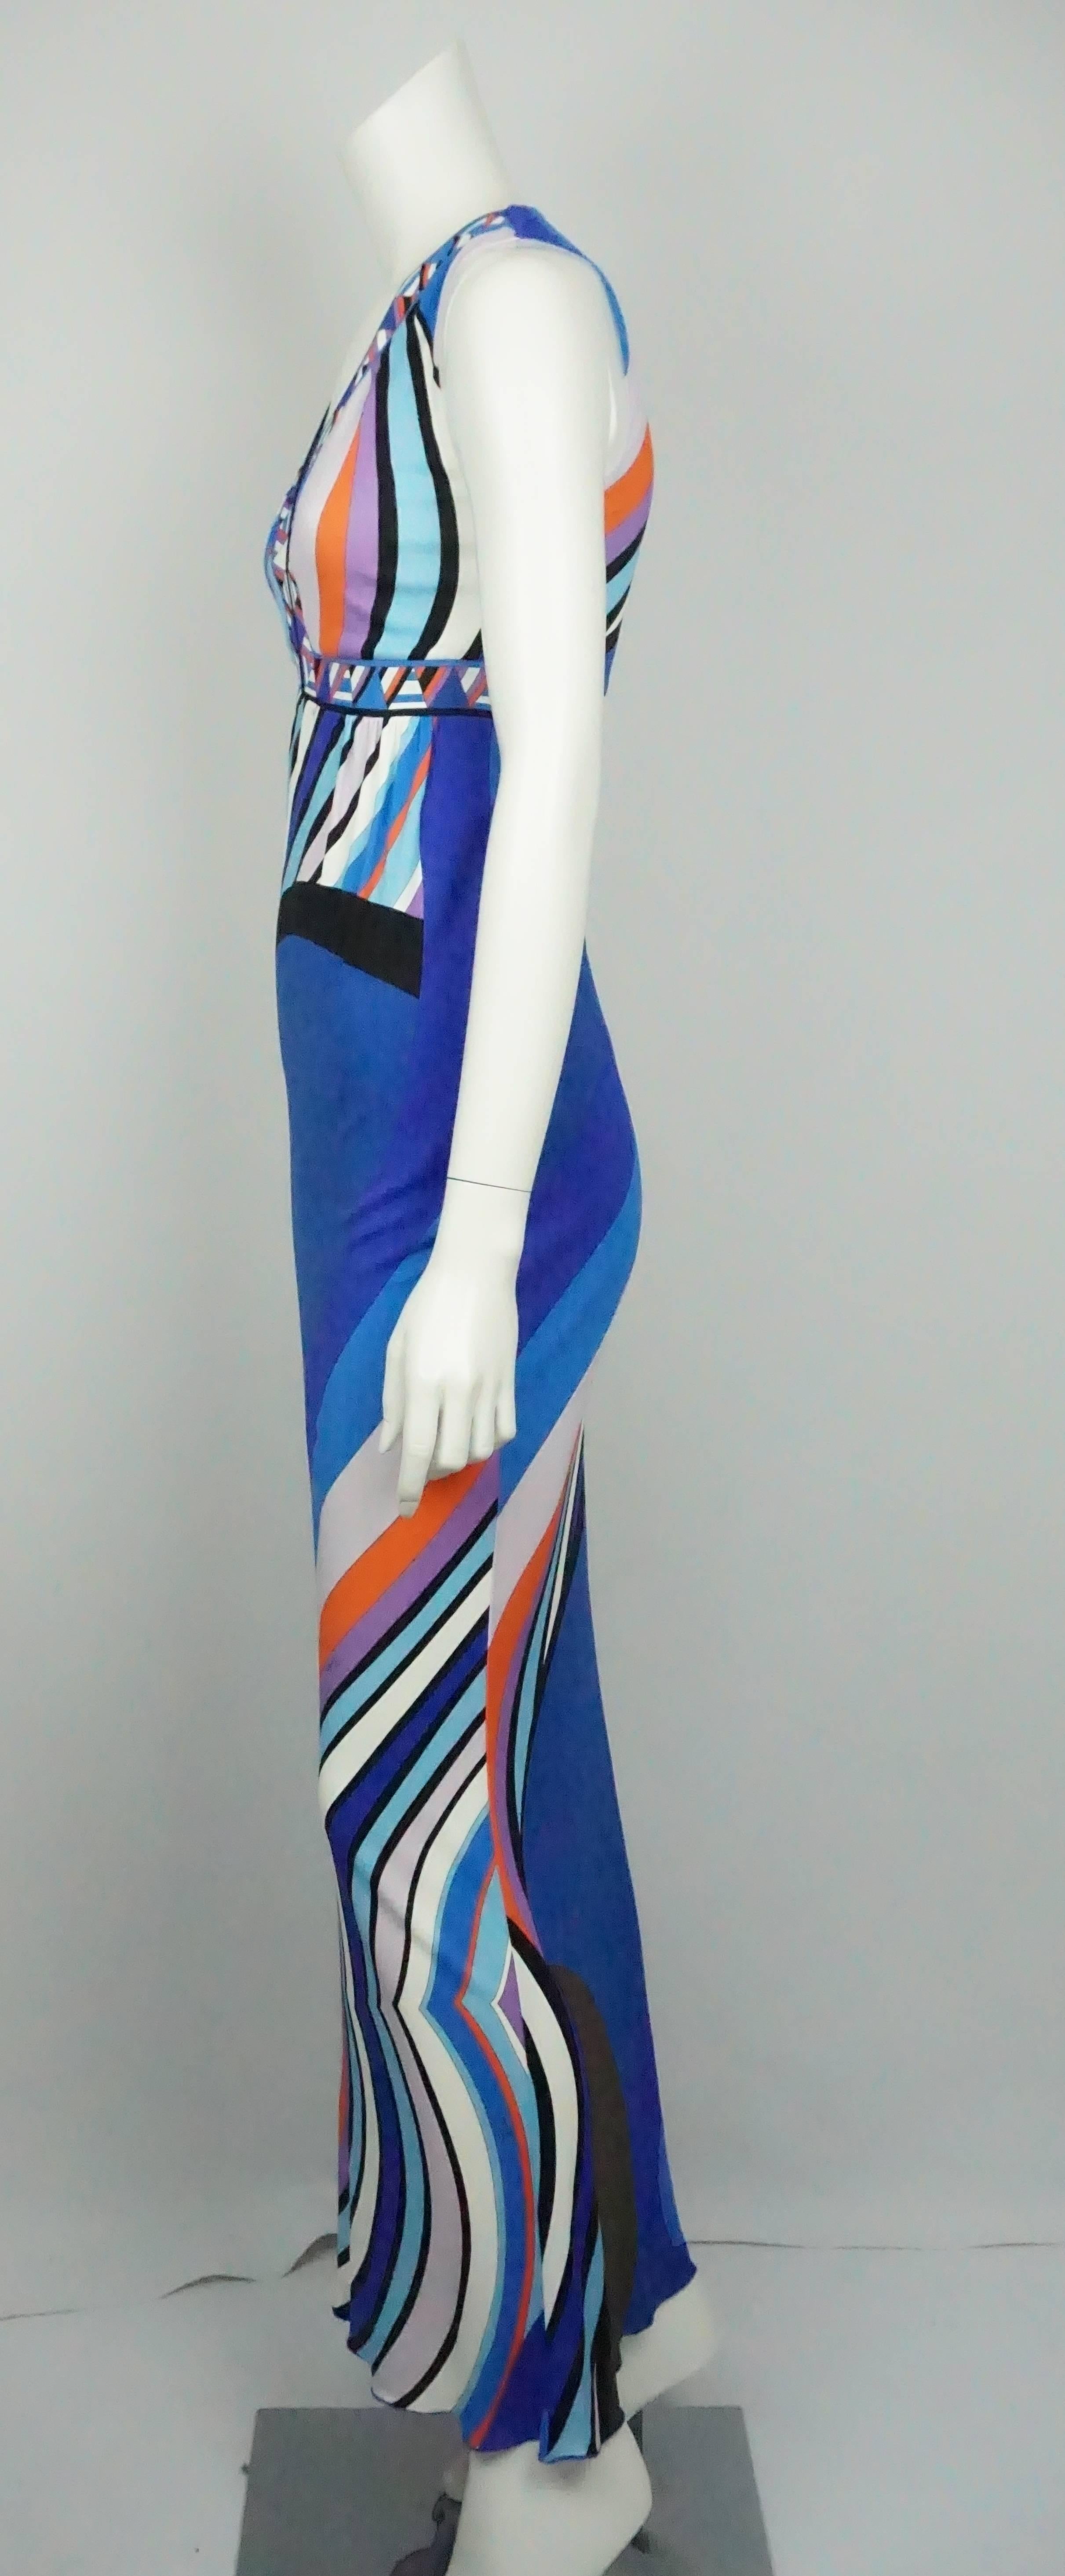 Emilio Pucci Multi Print Sleeveless Maxi Dress - 4   This Emilio Pucci maxi dress is in excellent condition. The dress is sleeveless and the neck has a deep v shape. The dress is made of viscose and silk. The colors on the dress consist of blues,